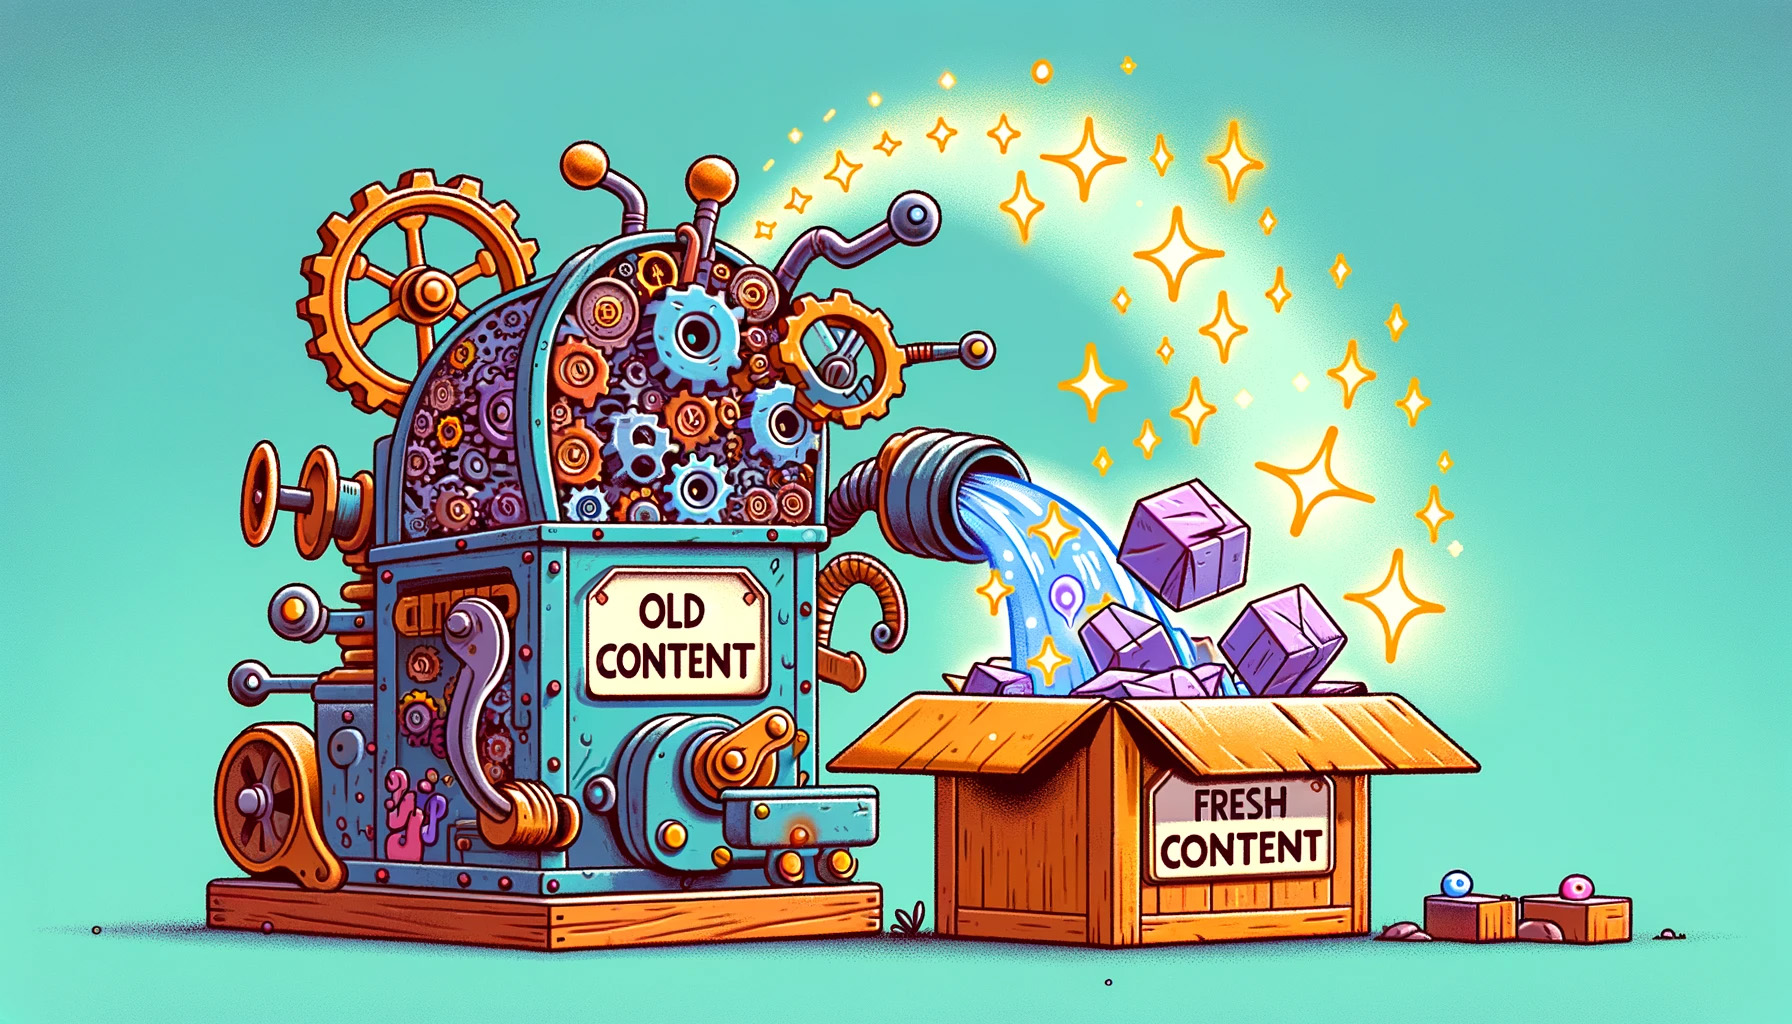 machine of old rusty content flowing into a box of new sparkly content.